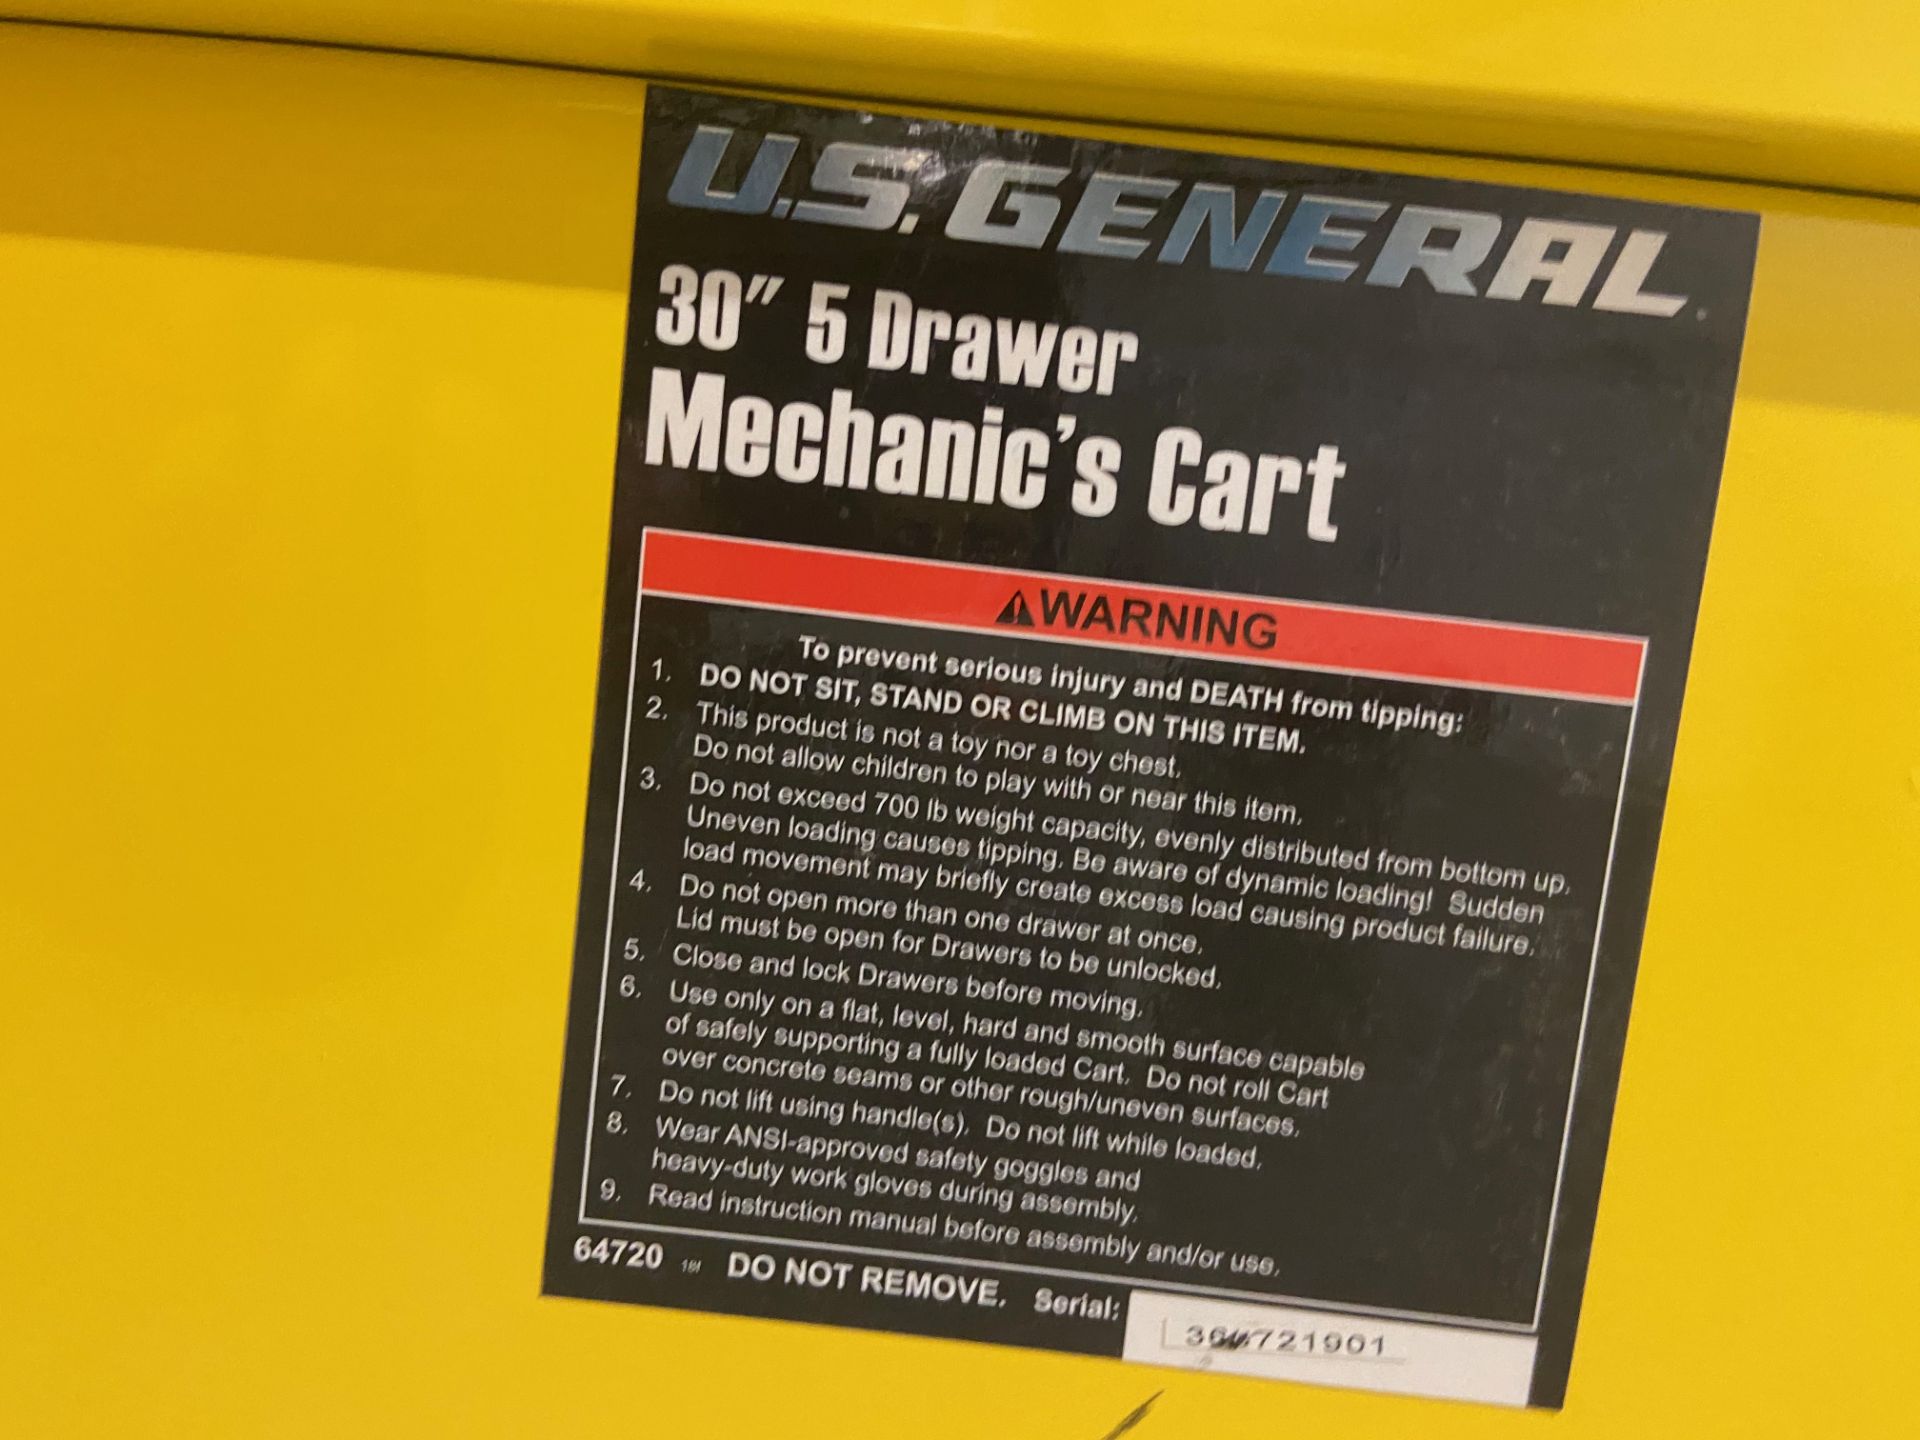 U.S. General Mechanic's Cart on Casters and Contents, 30", 5 Drawer, Rigging Fee: $20 - Image 5 of 6